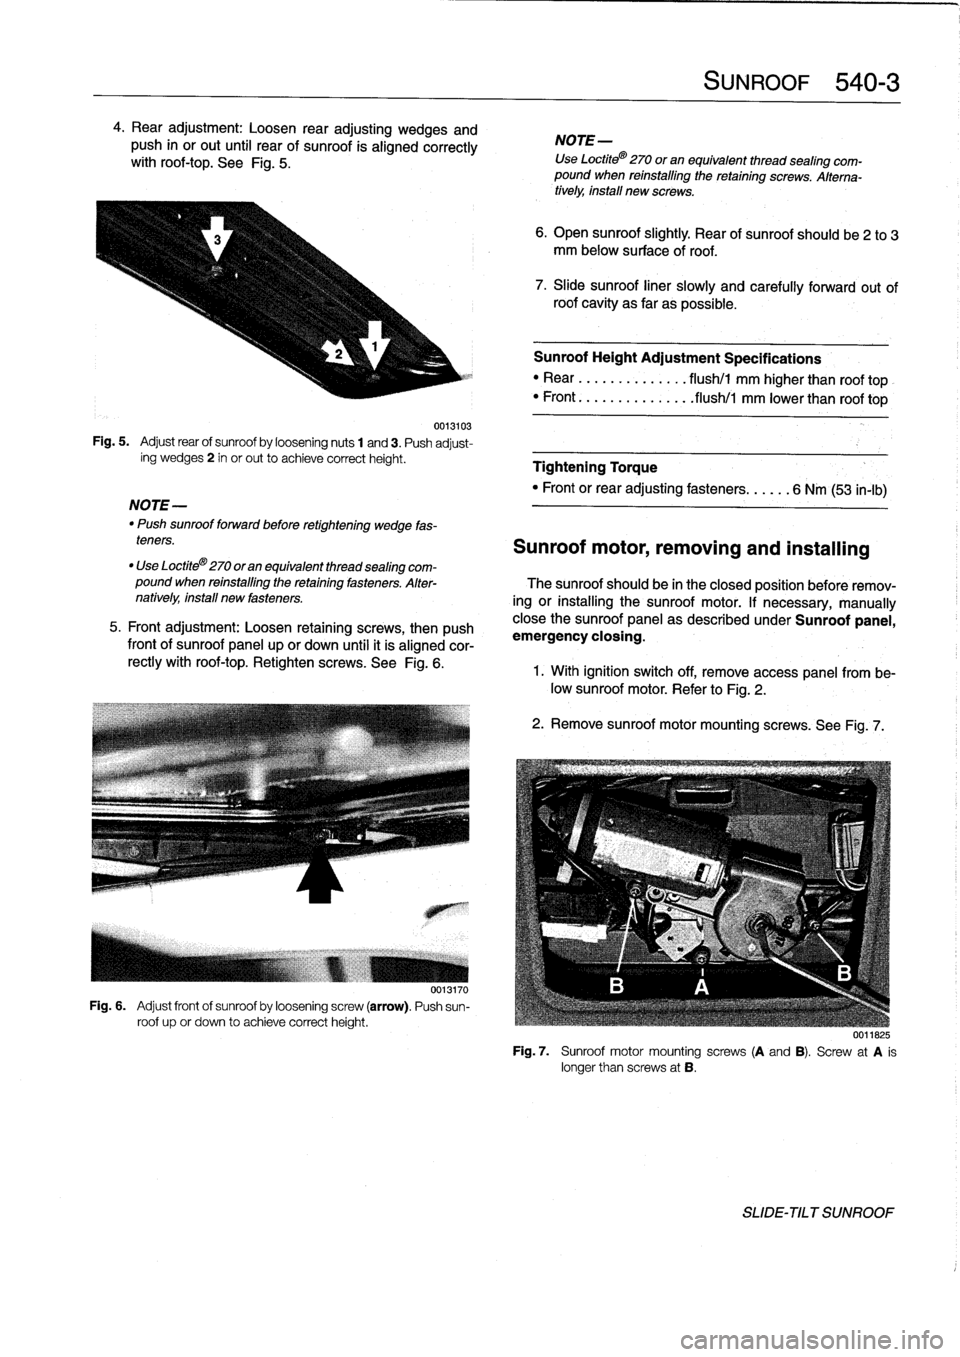 BMW M3 1996 E36 User Guide 4
.
Rear
adjustment
:
Loosen
rear
adjusting
wedges
and
push
in
or
out
until
rear
of
sunroof
is
aligned
correctly
withroof-top
.
See
Fig
.
5
.

0013103
Fig
.
5
.

	

Adjust
rear
of
sunroof
by
loosening